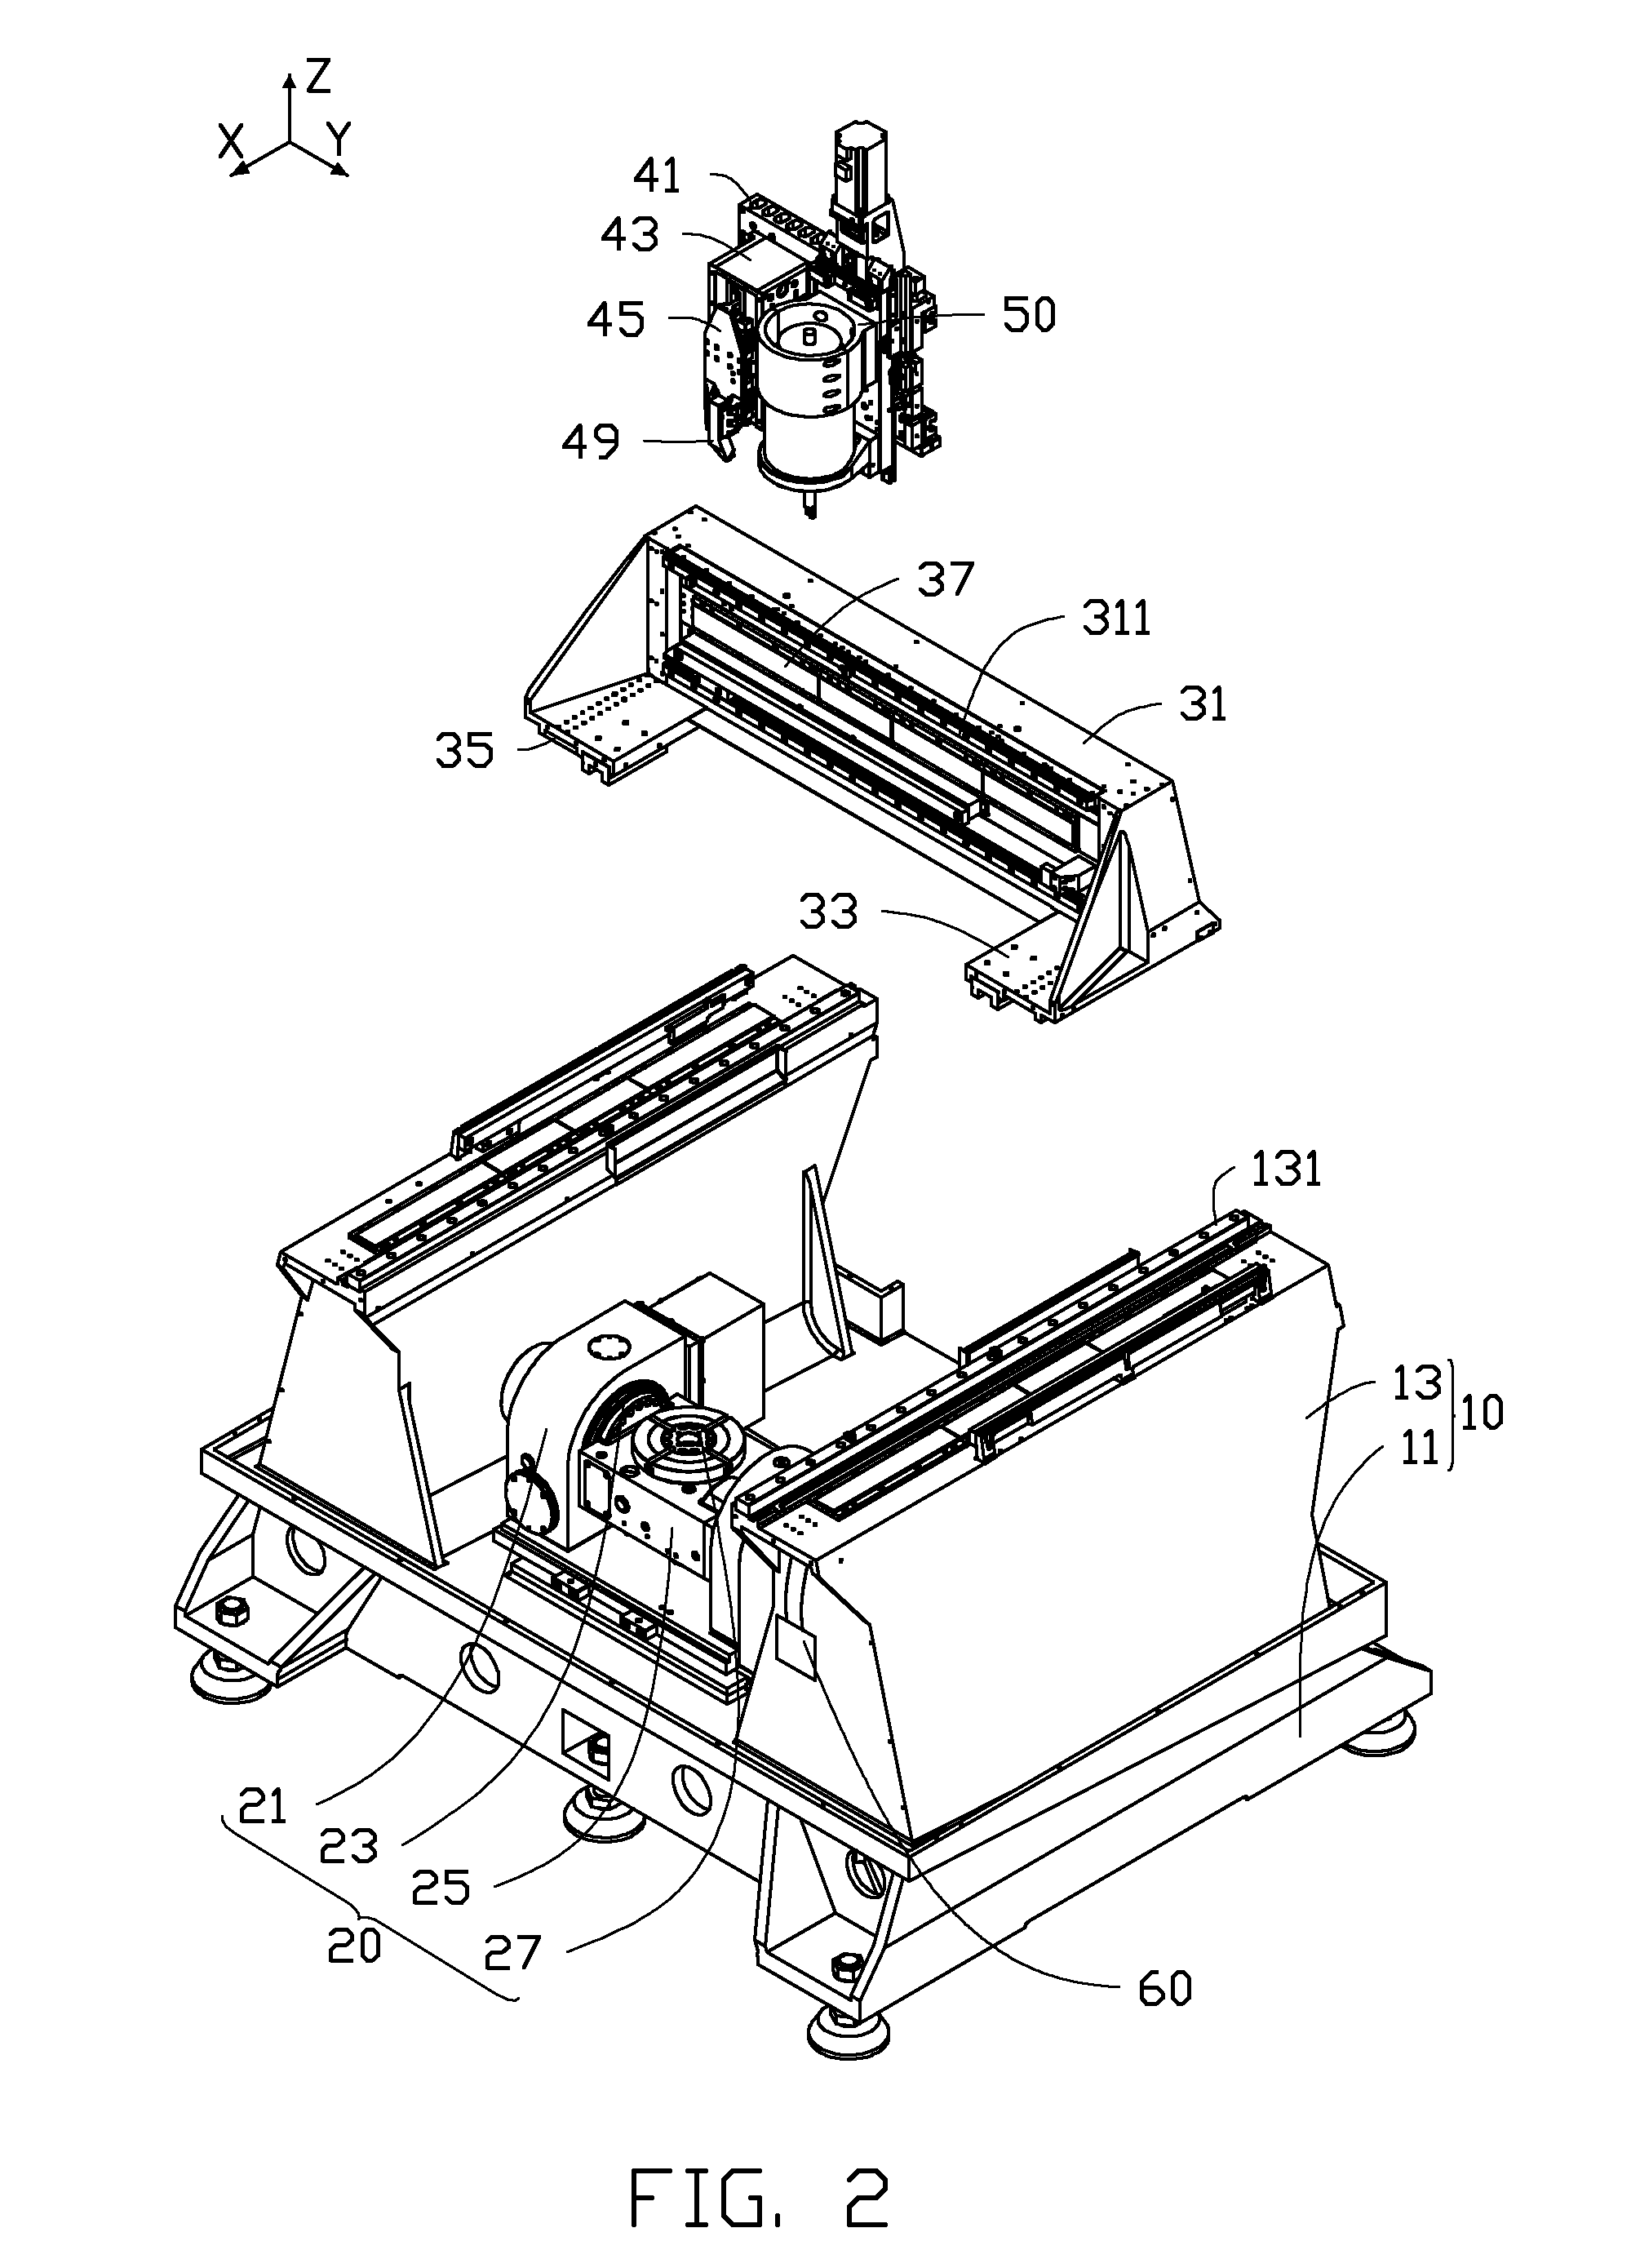 Machine tool with lathe tool and scraping cutter